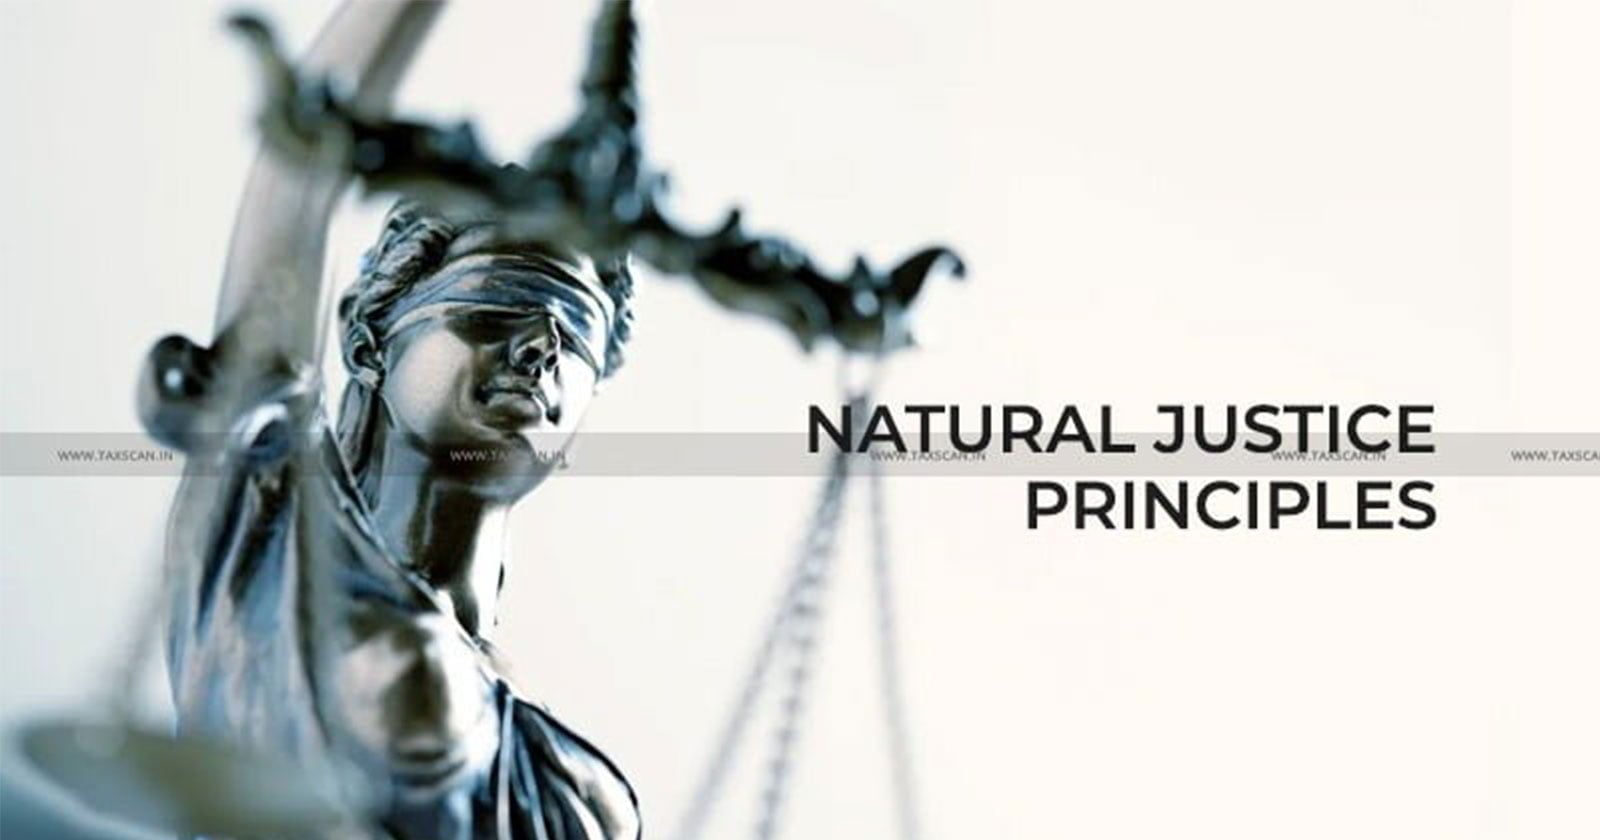 DSA - and - Lack - Cross - Examinations - Natural - Justice - Principles - CESTAT - Excise - Duty - TAXSCAN